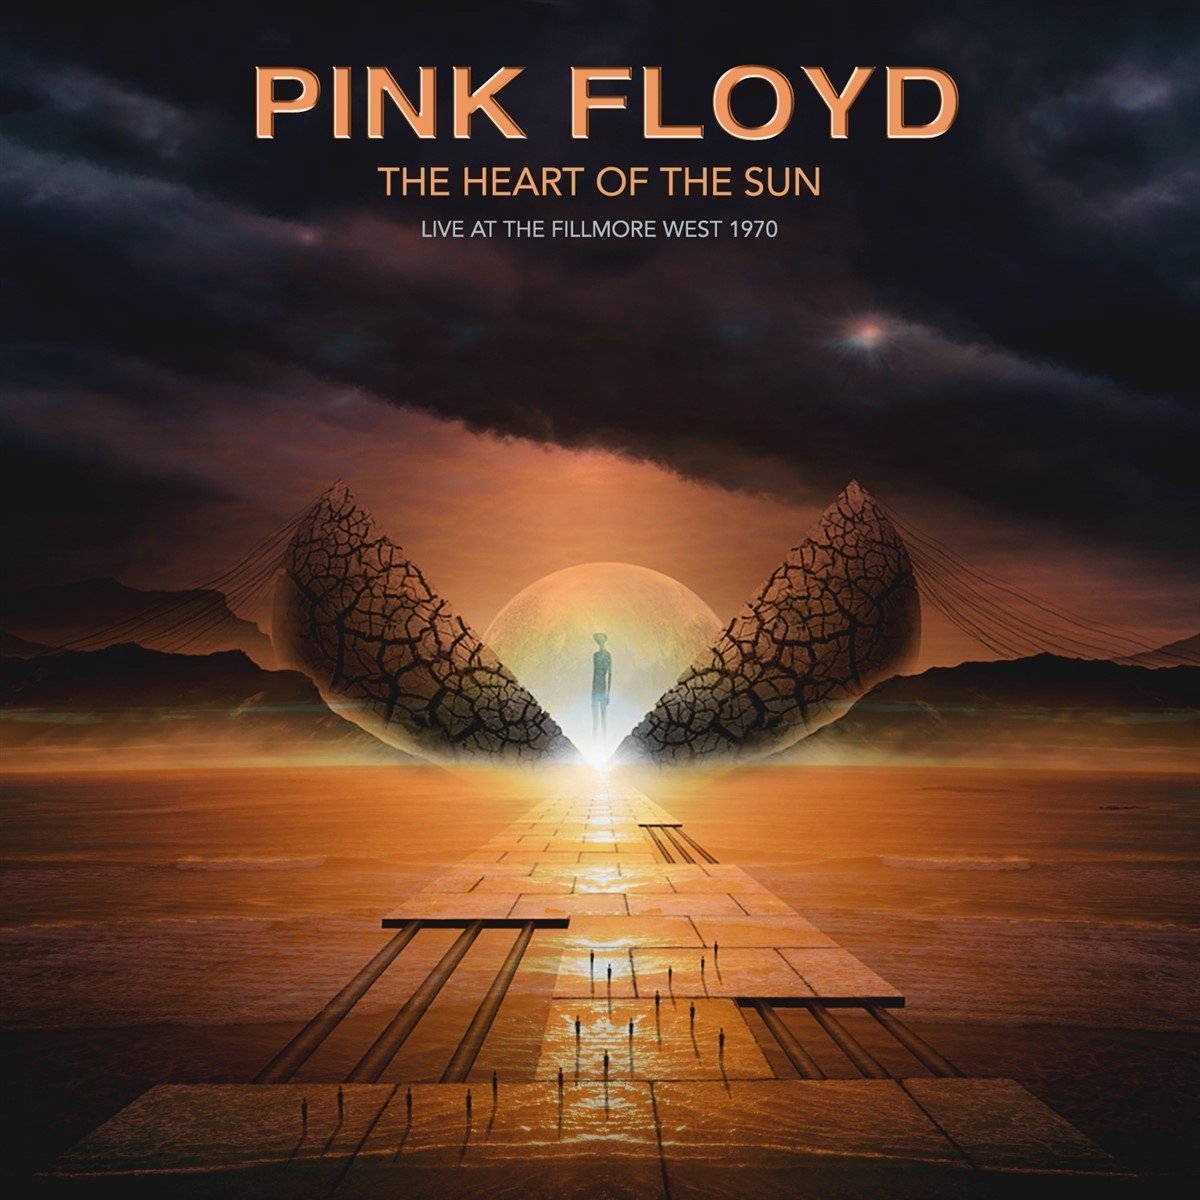 The Heart Of The Sun - Live At The Fillmore West 1970 (CD) - Pink Floyd